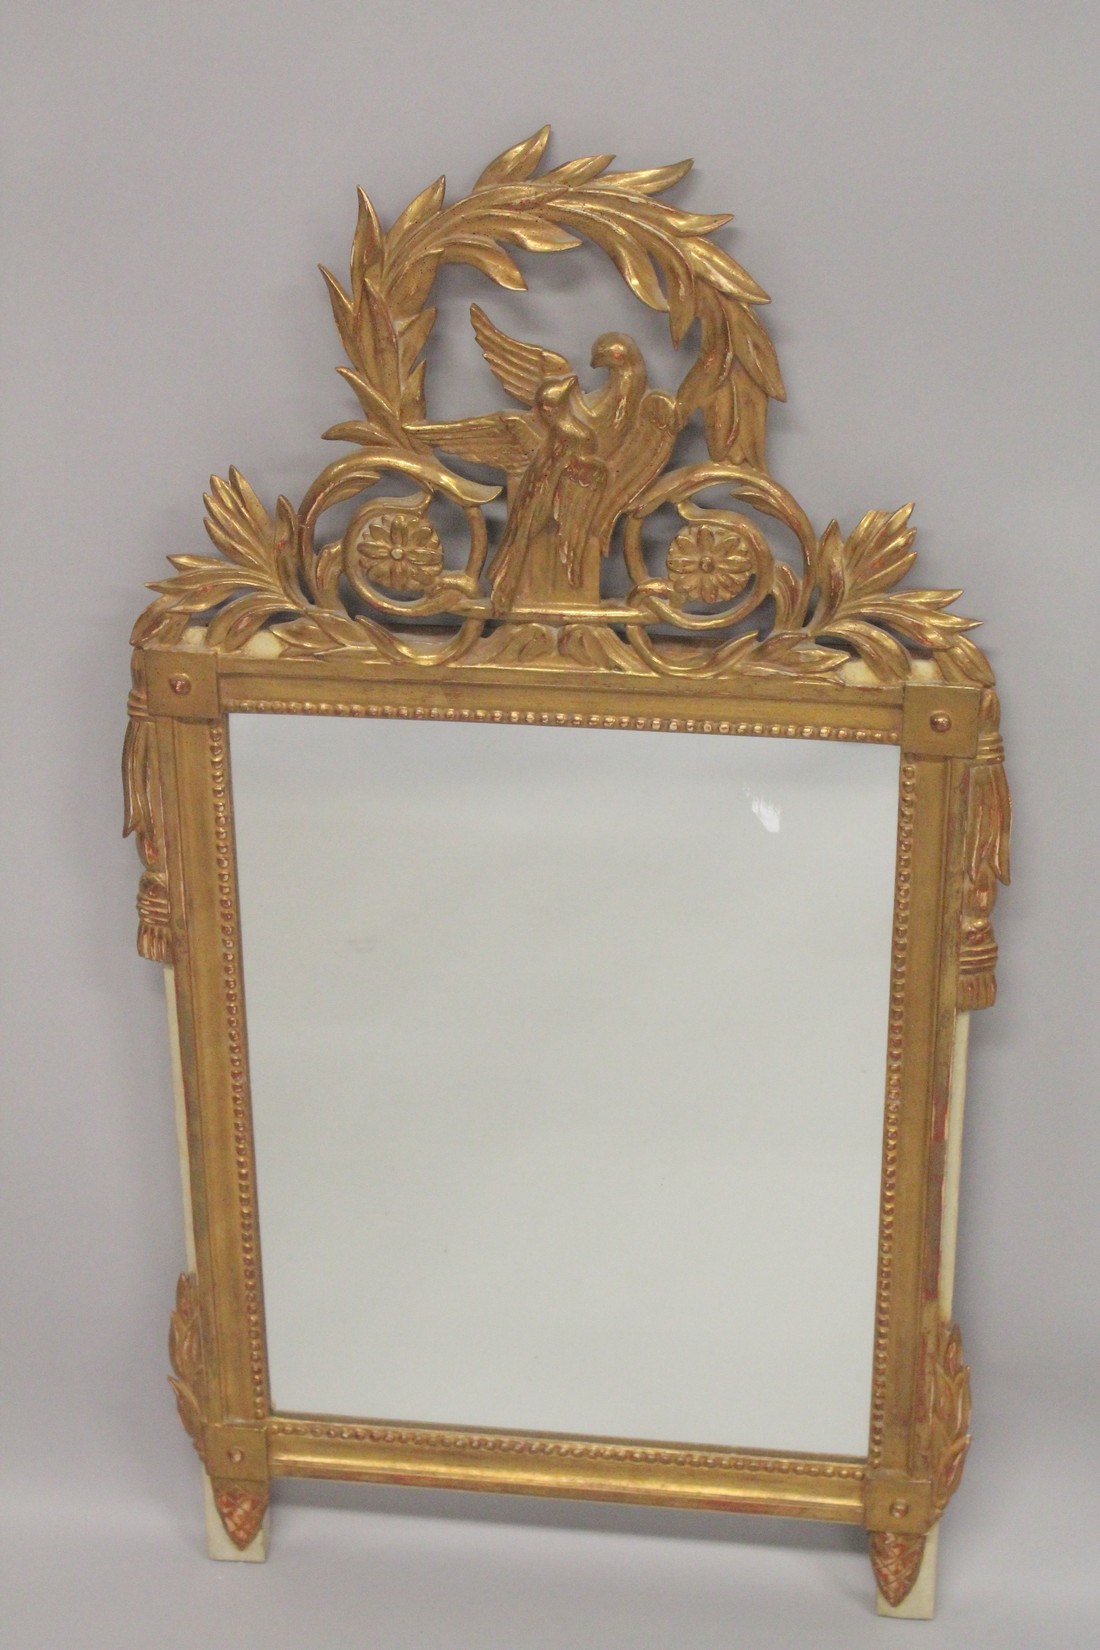 A GOOD ITALIAN GILTWOOD MIRROR with two love birds and foliage. 3ft 4ins high, 1ft 8ins wide.